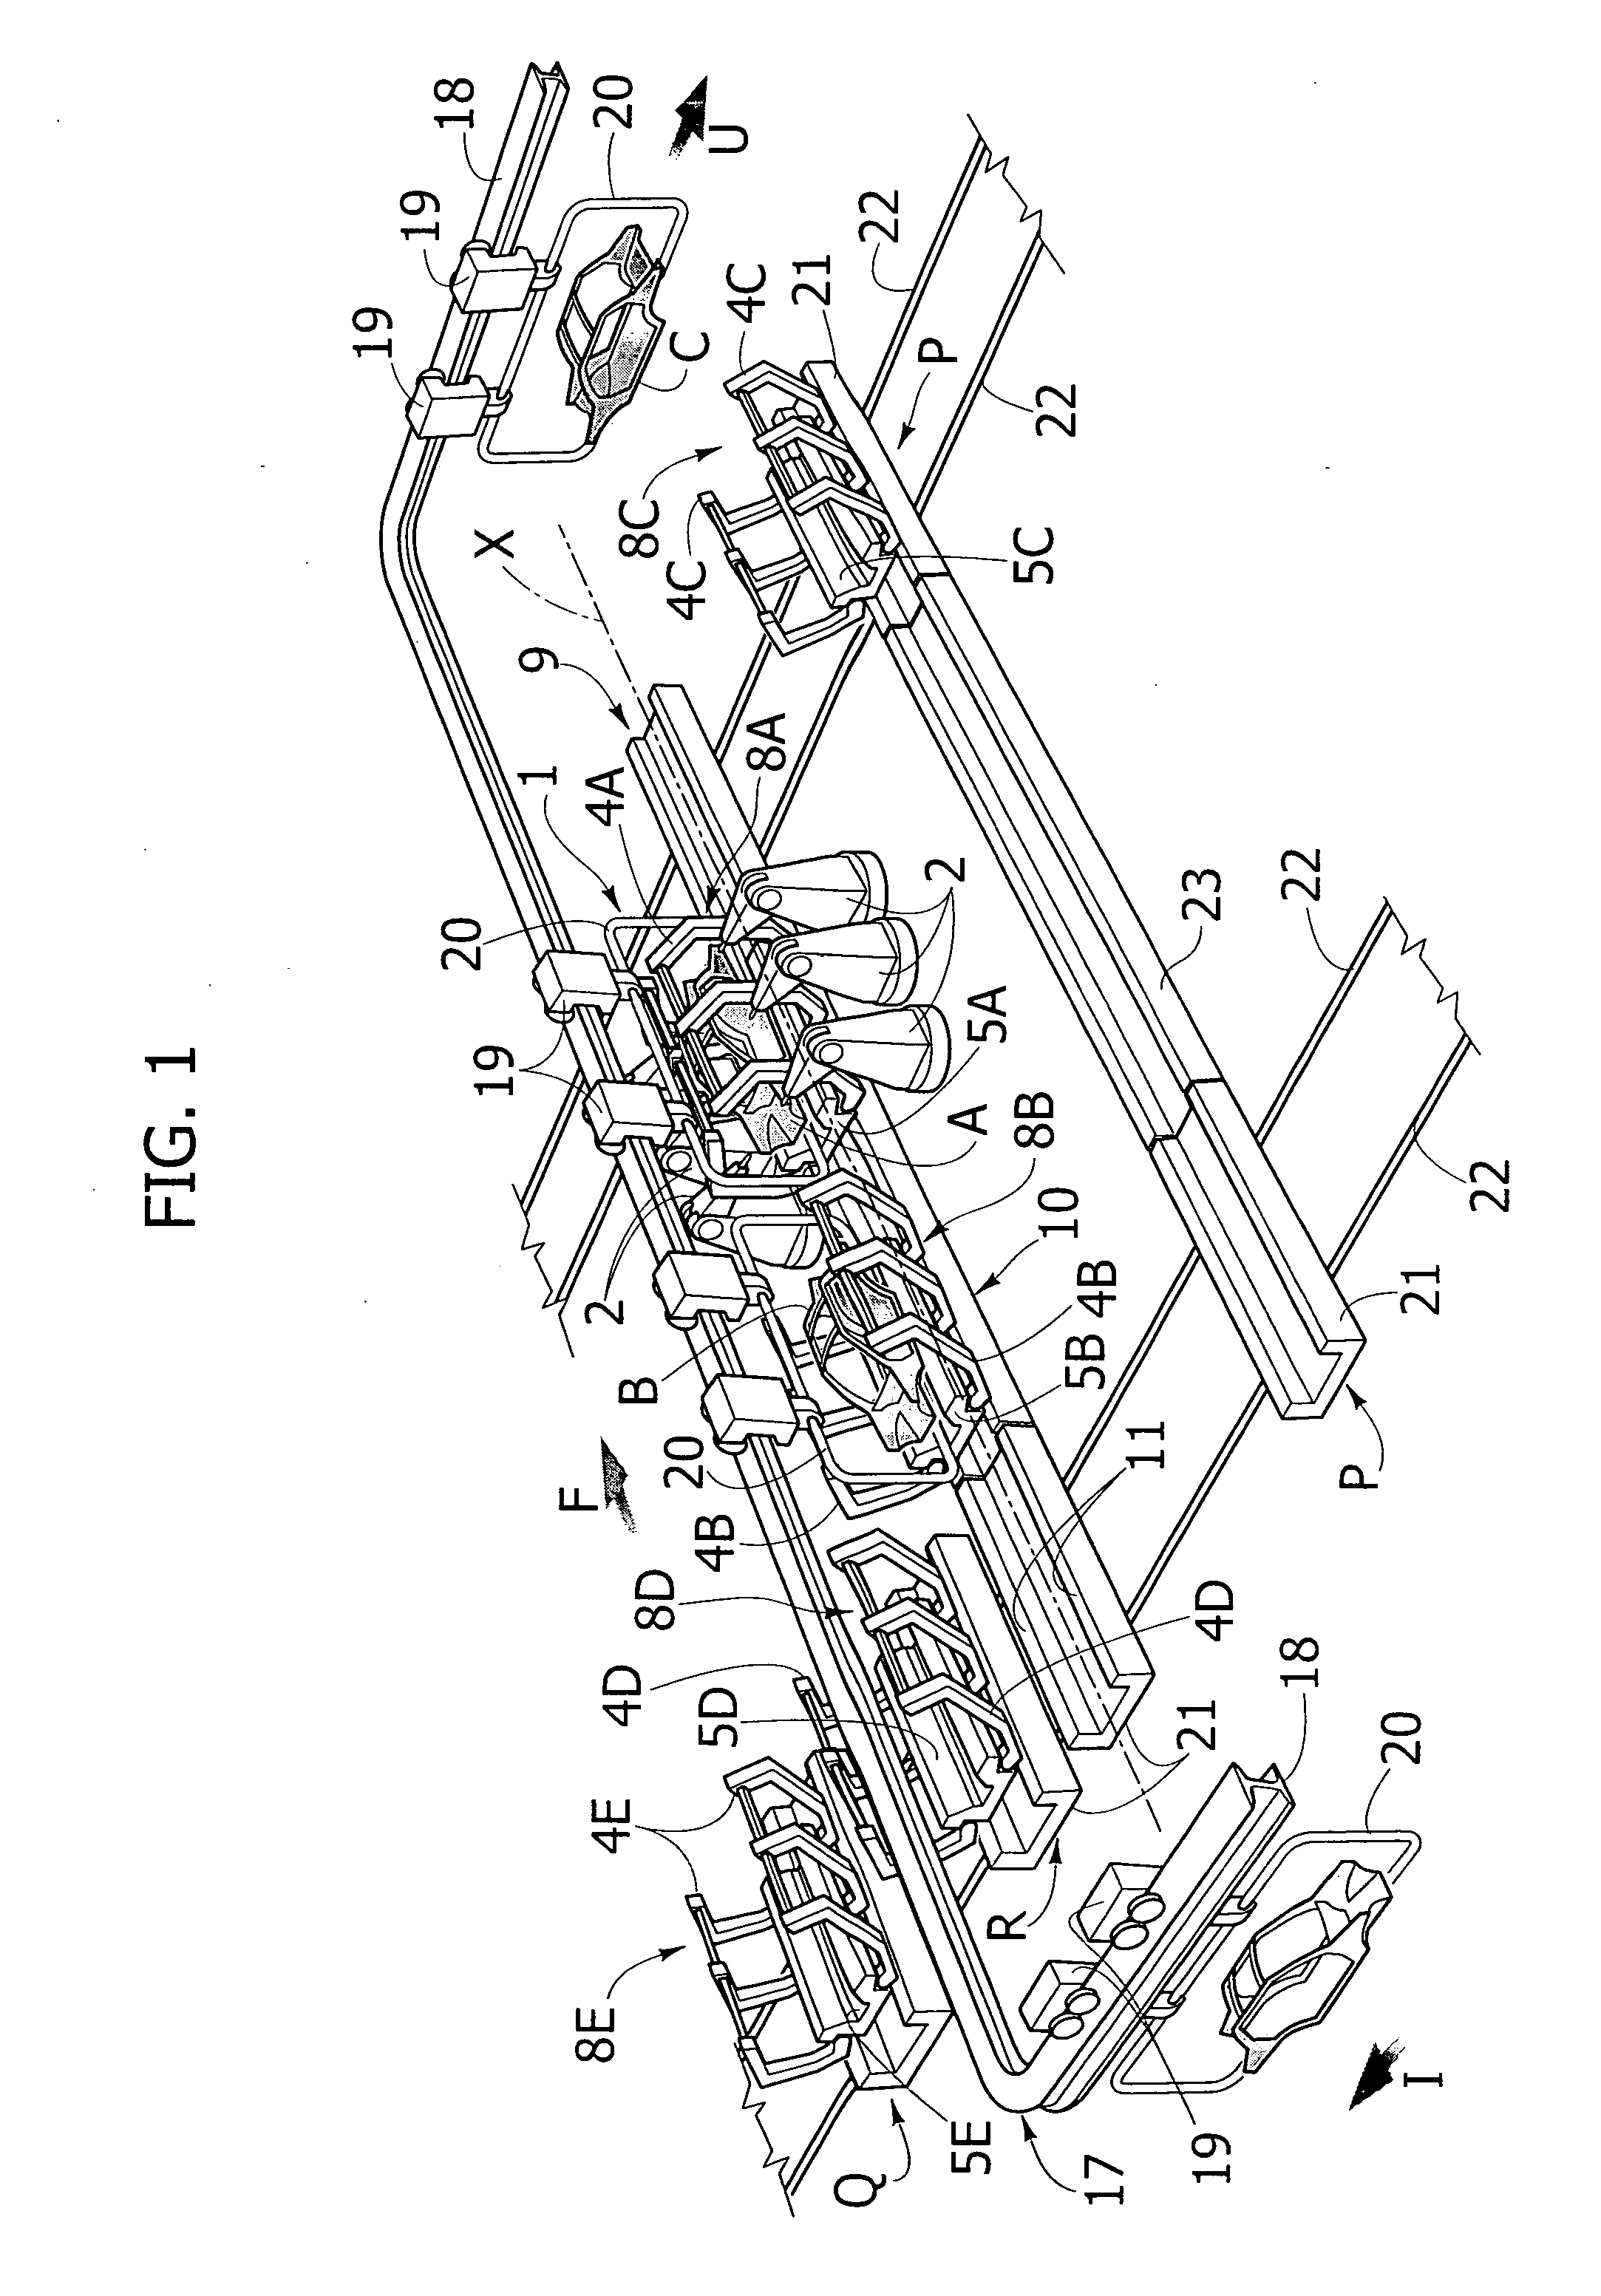 System for assembling, in particular by welding, structures made up of elements of pressed sheet metal, such as motor-vehicle bodies or subassemblies thereof